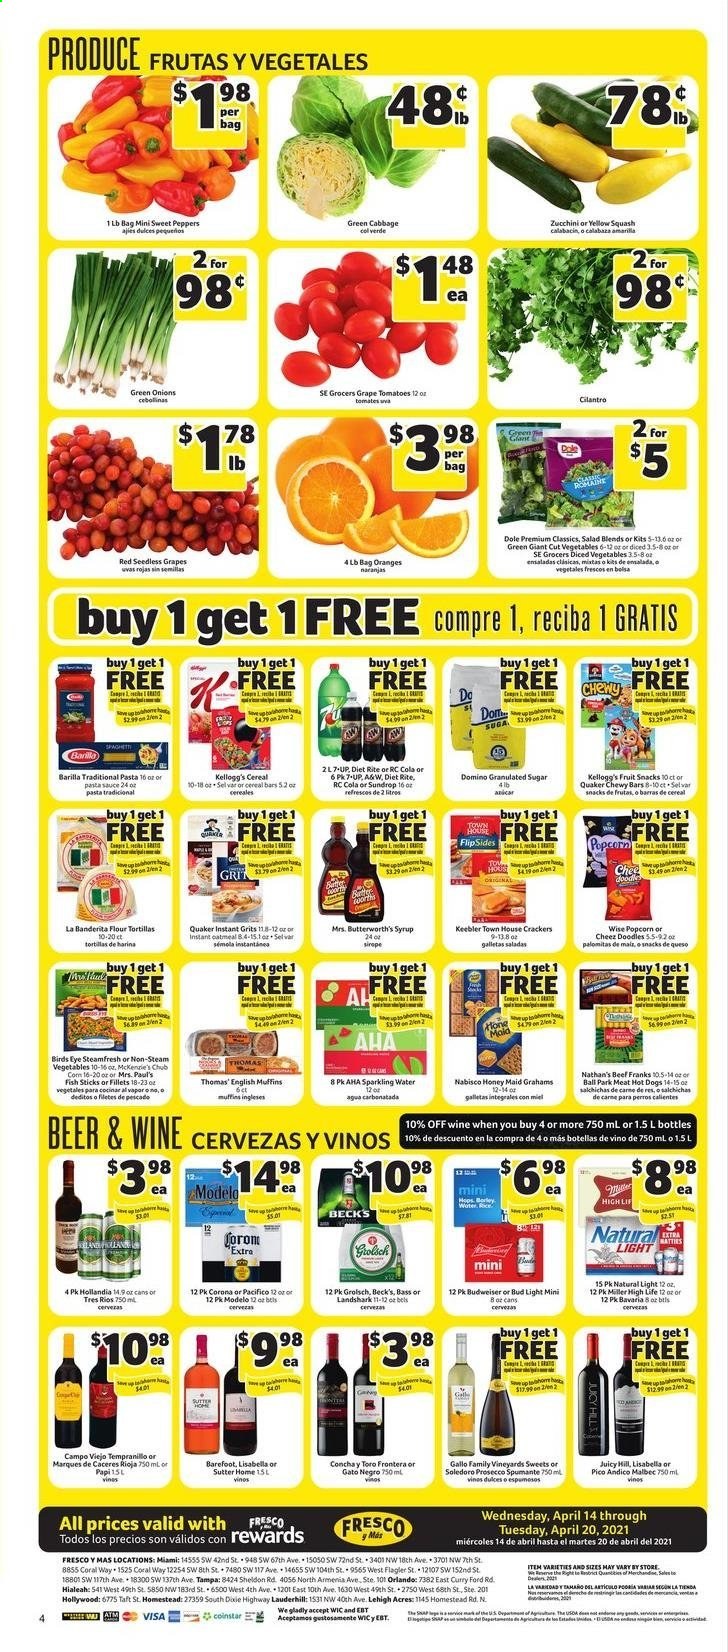 thumbnail - Fresco y Más Flyer - 04/14/2021 - 04/20/2021 - Sales products - Budweiser, sweet peppers, zucchini, seedless grapes, english muffins, tortillas, flour tortillas, cabbage, tomatoes, salad, Dole, green onion, oranges, fish, fish fingers, fish sticks, hot dog, pasta sauce, sauce, Bird's Eye, Barilla, Quaker, cereal bar, crackers, Kellogg's, fruit snack, Keebler, popcorn, granulated sugar, sugar, grits, Honey Maid, cilantro, syrup, 7UP, sparkling water, spumante, prosecco, Campo Viejo, Marqués de Cáceres, Gallo Family, Tempranillo, beer, Bud Light, Corona Extra, Miller, Beck's, Grolsch, Modelo, peppers. Page 4.